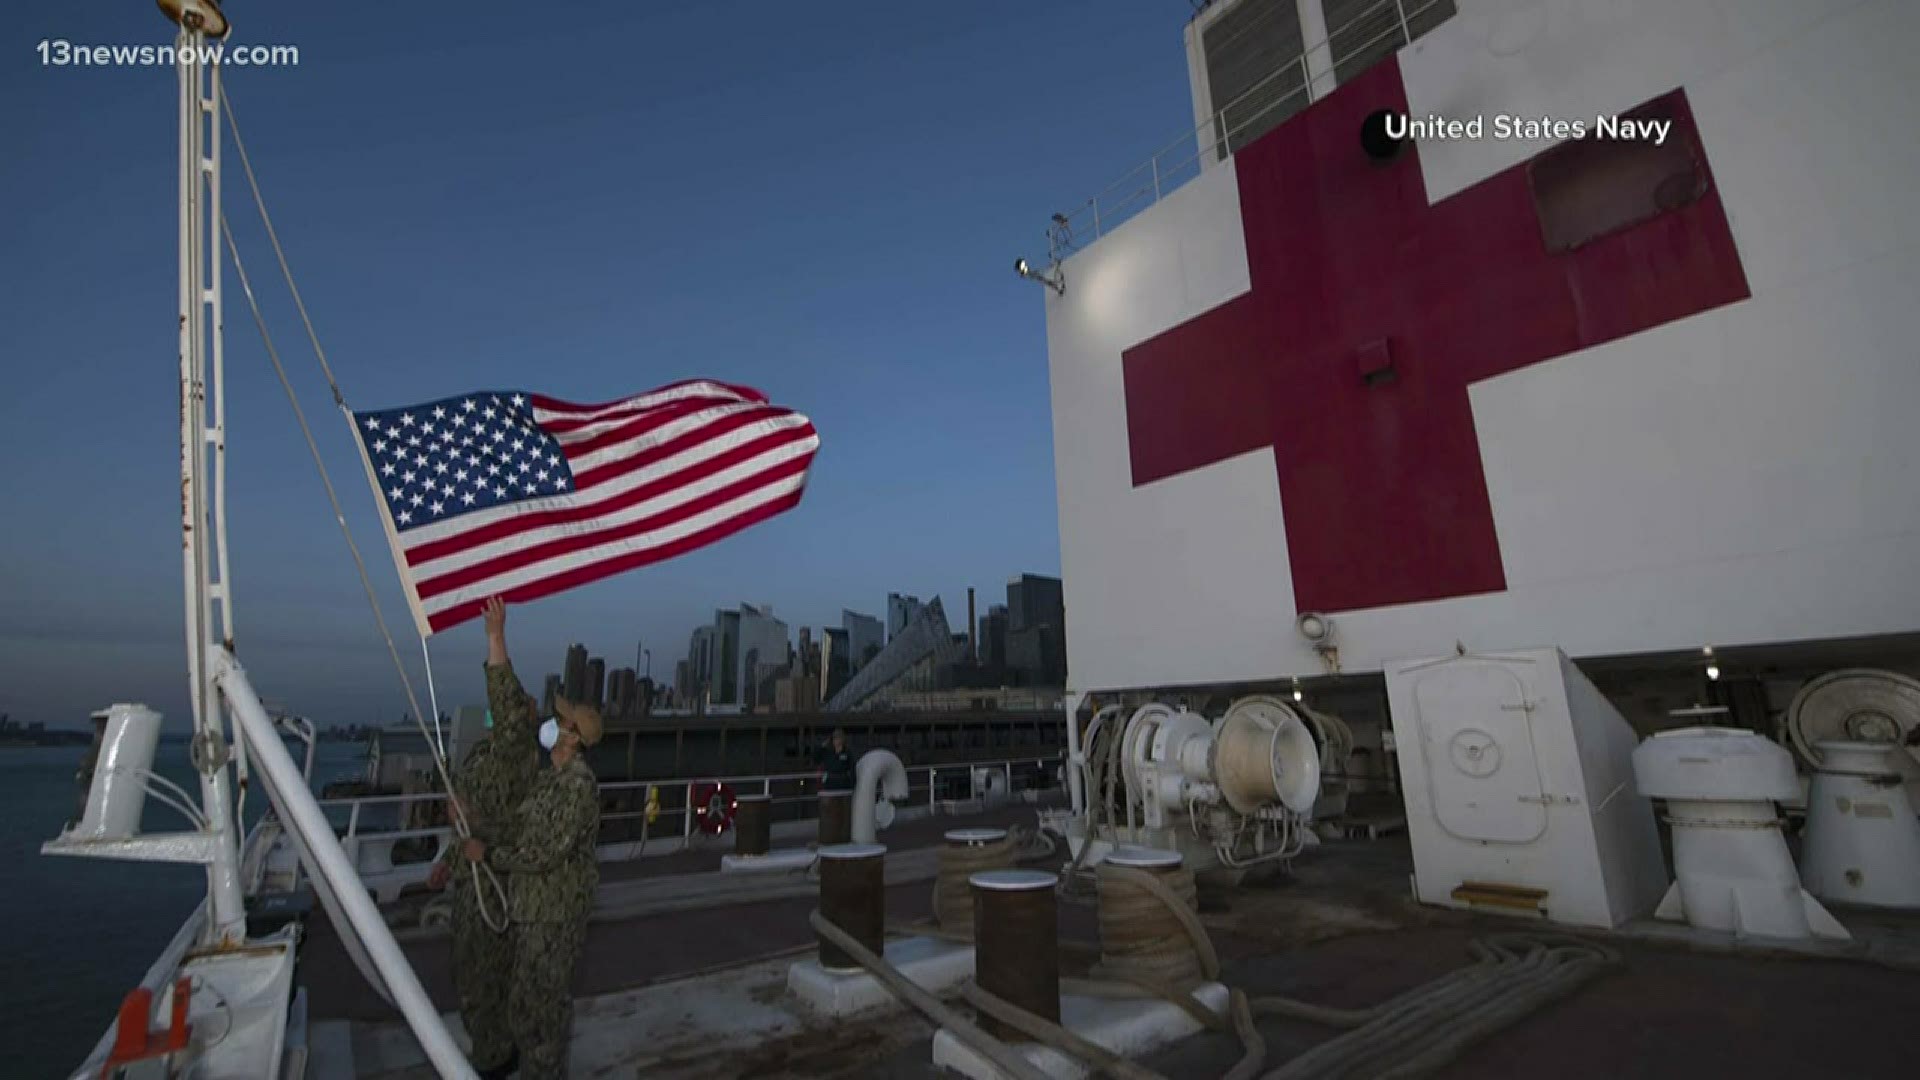 Crew members on board the USNS Comfort are working to help New York as the state battles the coronavirus pandemic. They are treating coronavirus patients and others.